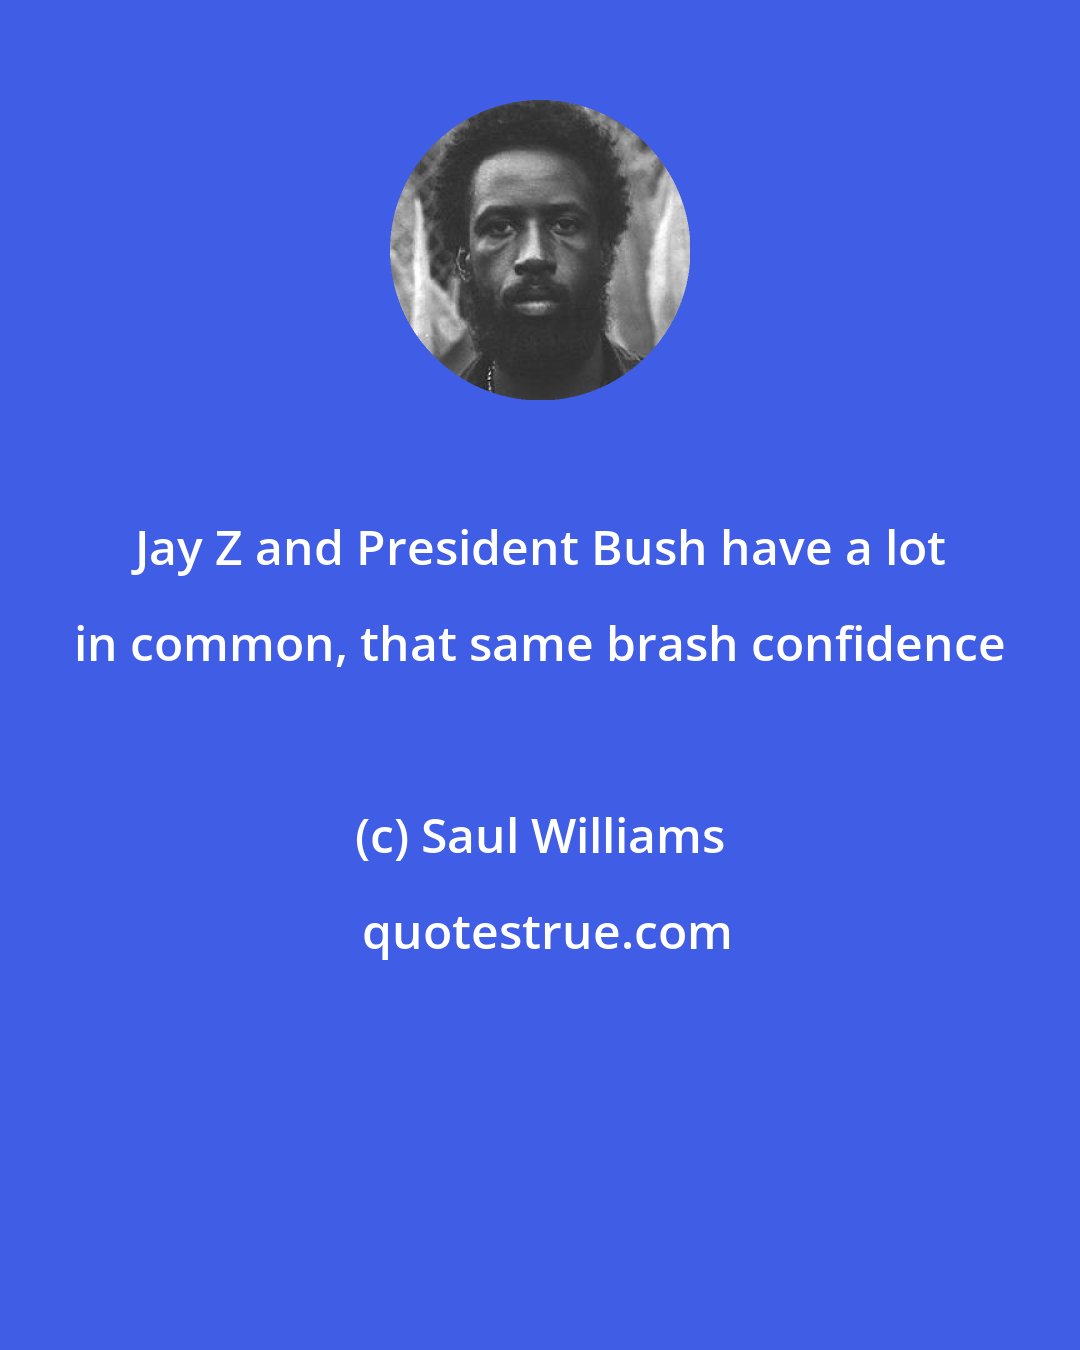 Saul Williams: Jay Z and President Bush have a lot in common, that same brash confidence